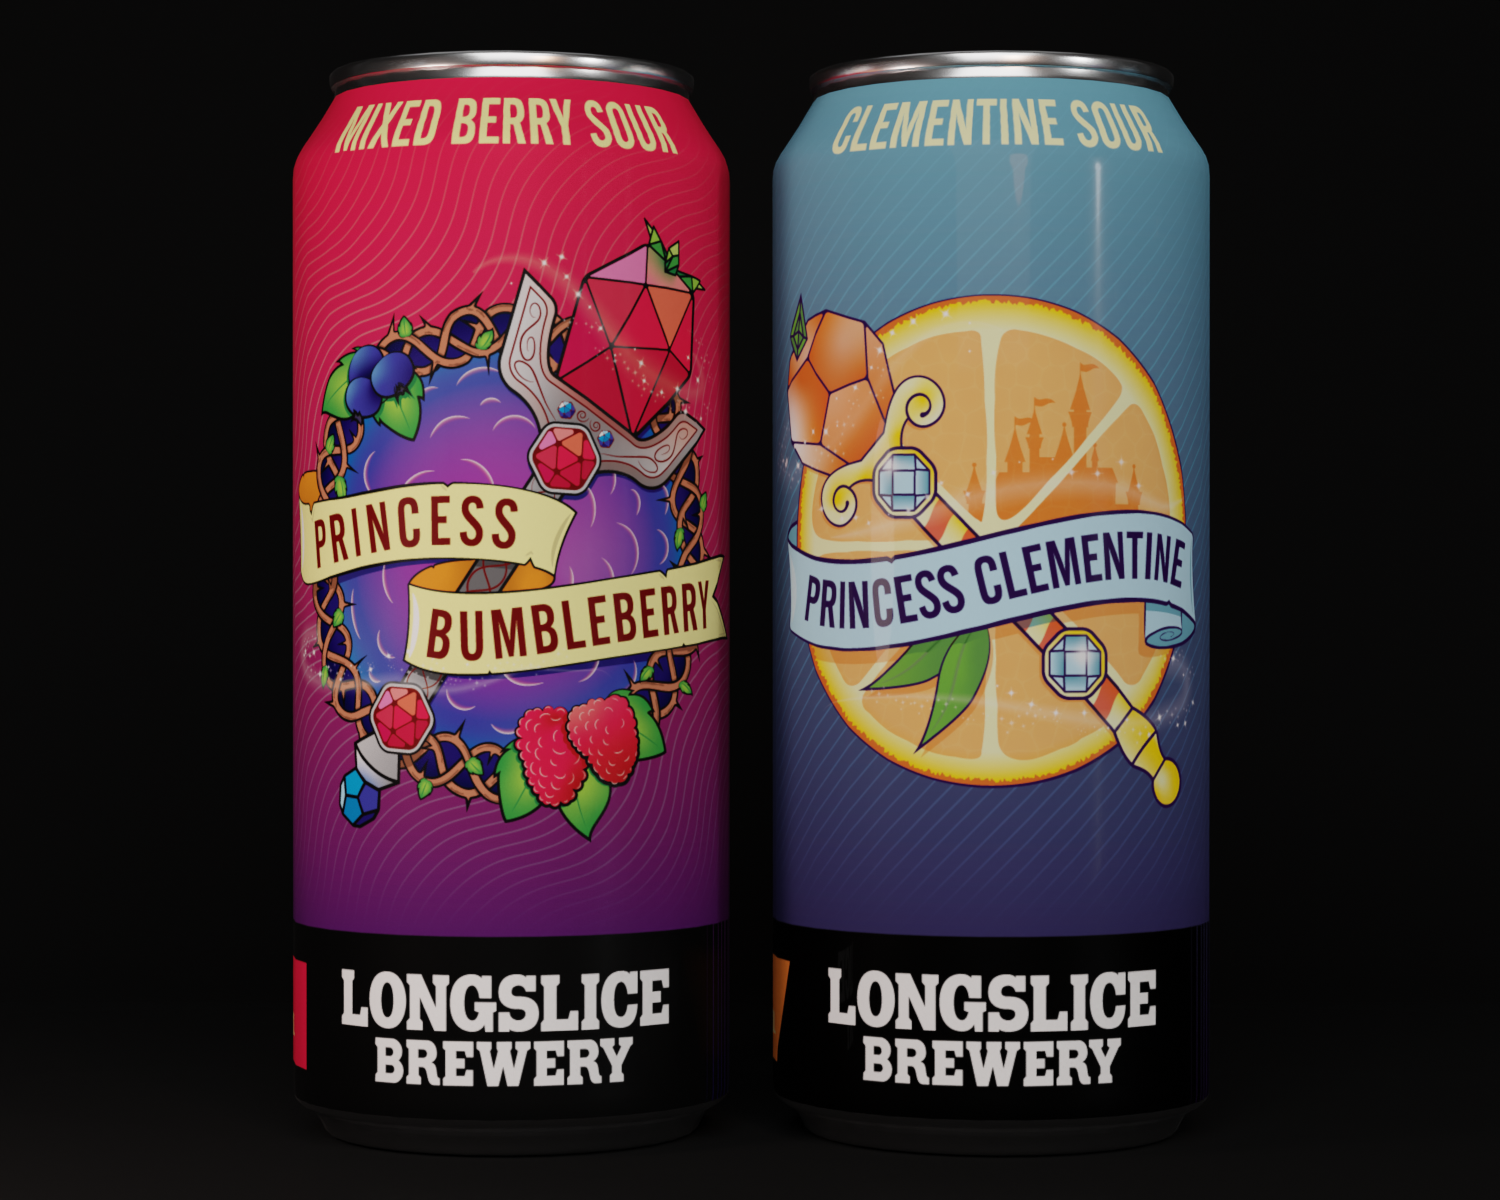 Longslice Brewery Sour Series Princess Clementine and Princess Bumbleberry